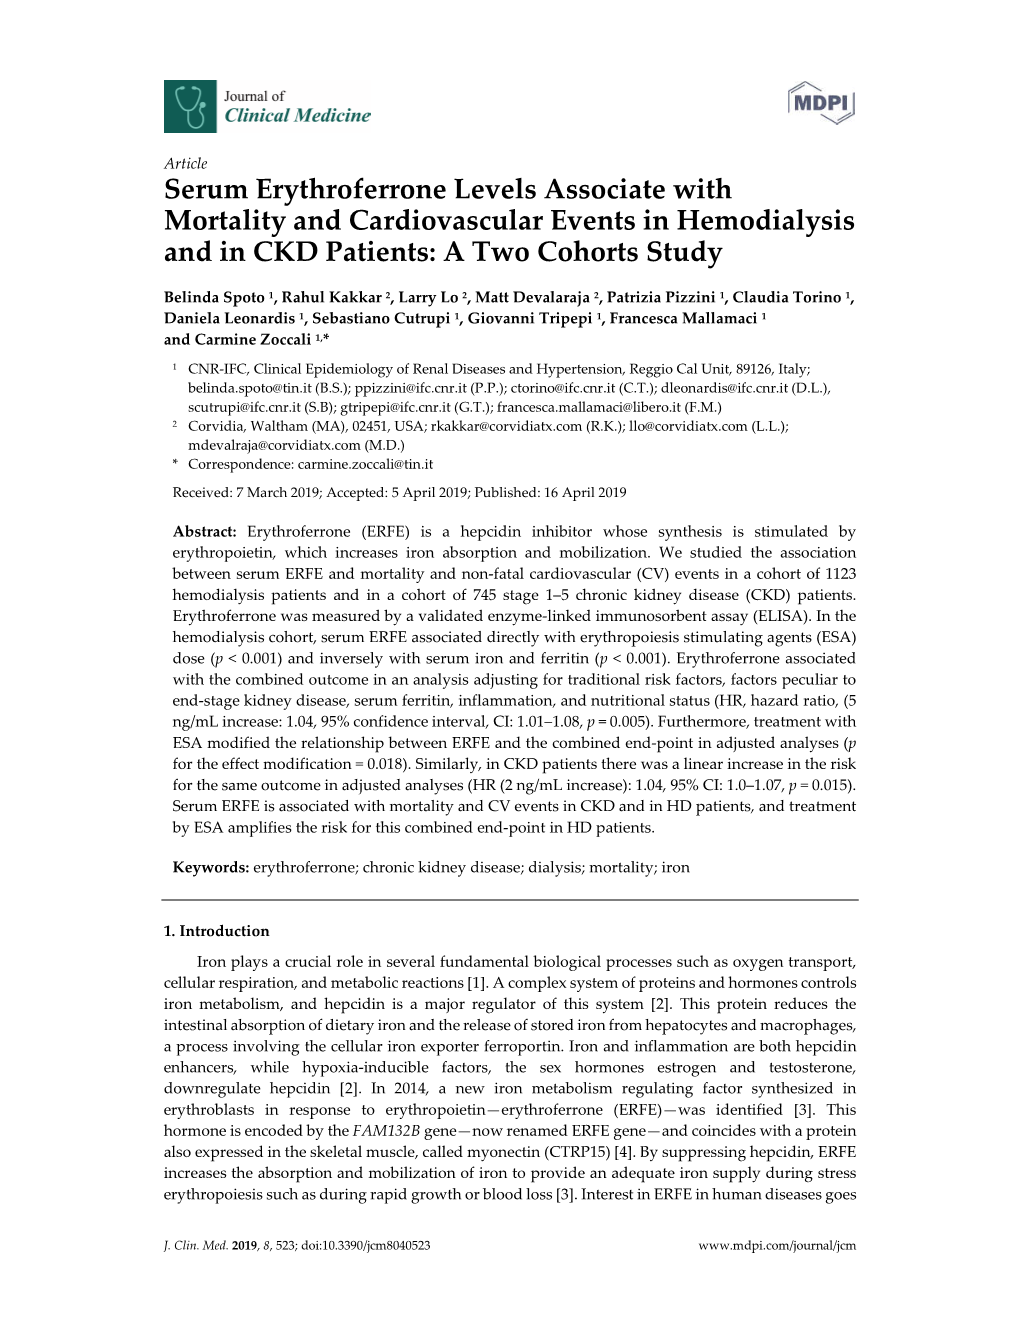 Serum Erythroferrone Levels Associate with Mortality and Cardiovascular Events in Hemodialysis and in CKD Patients: a Two Cohorts Study